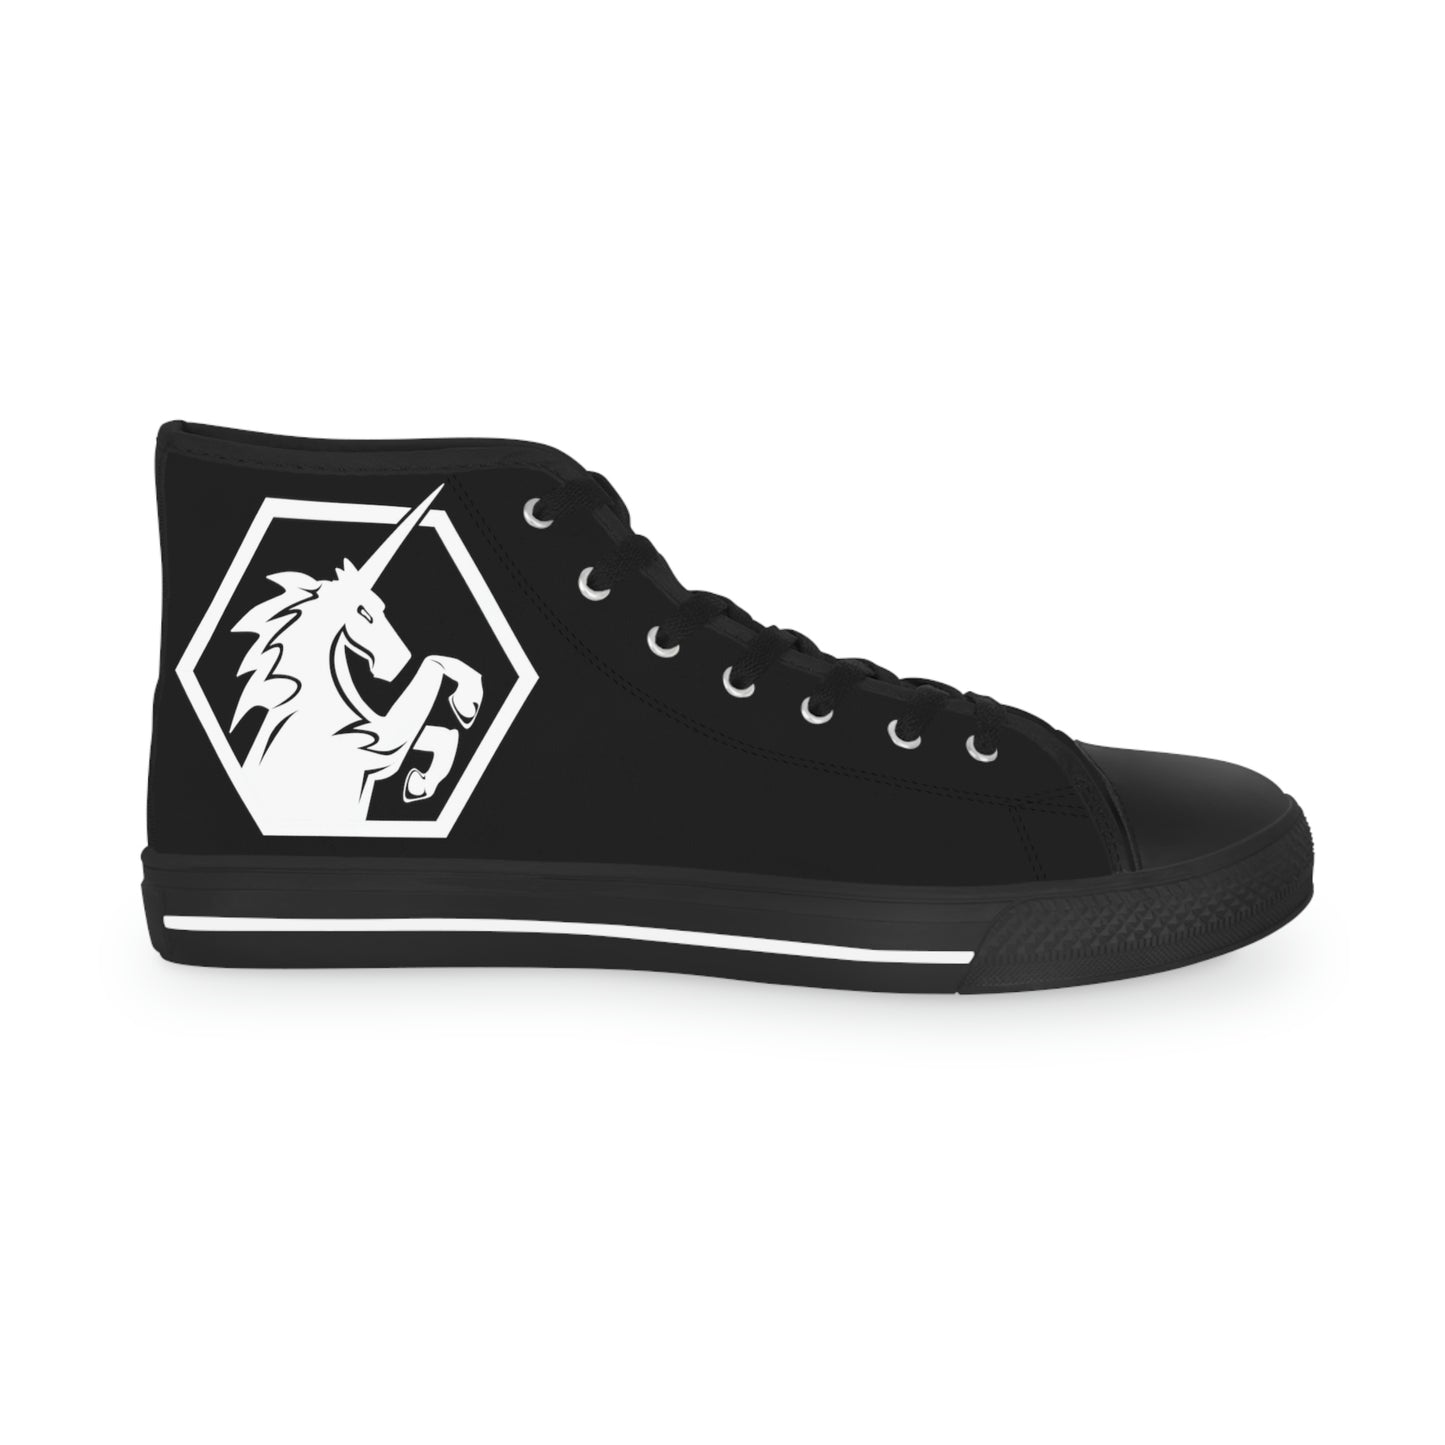 Black w/White High Top Sneakers